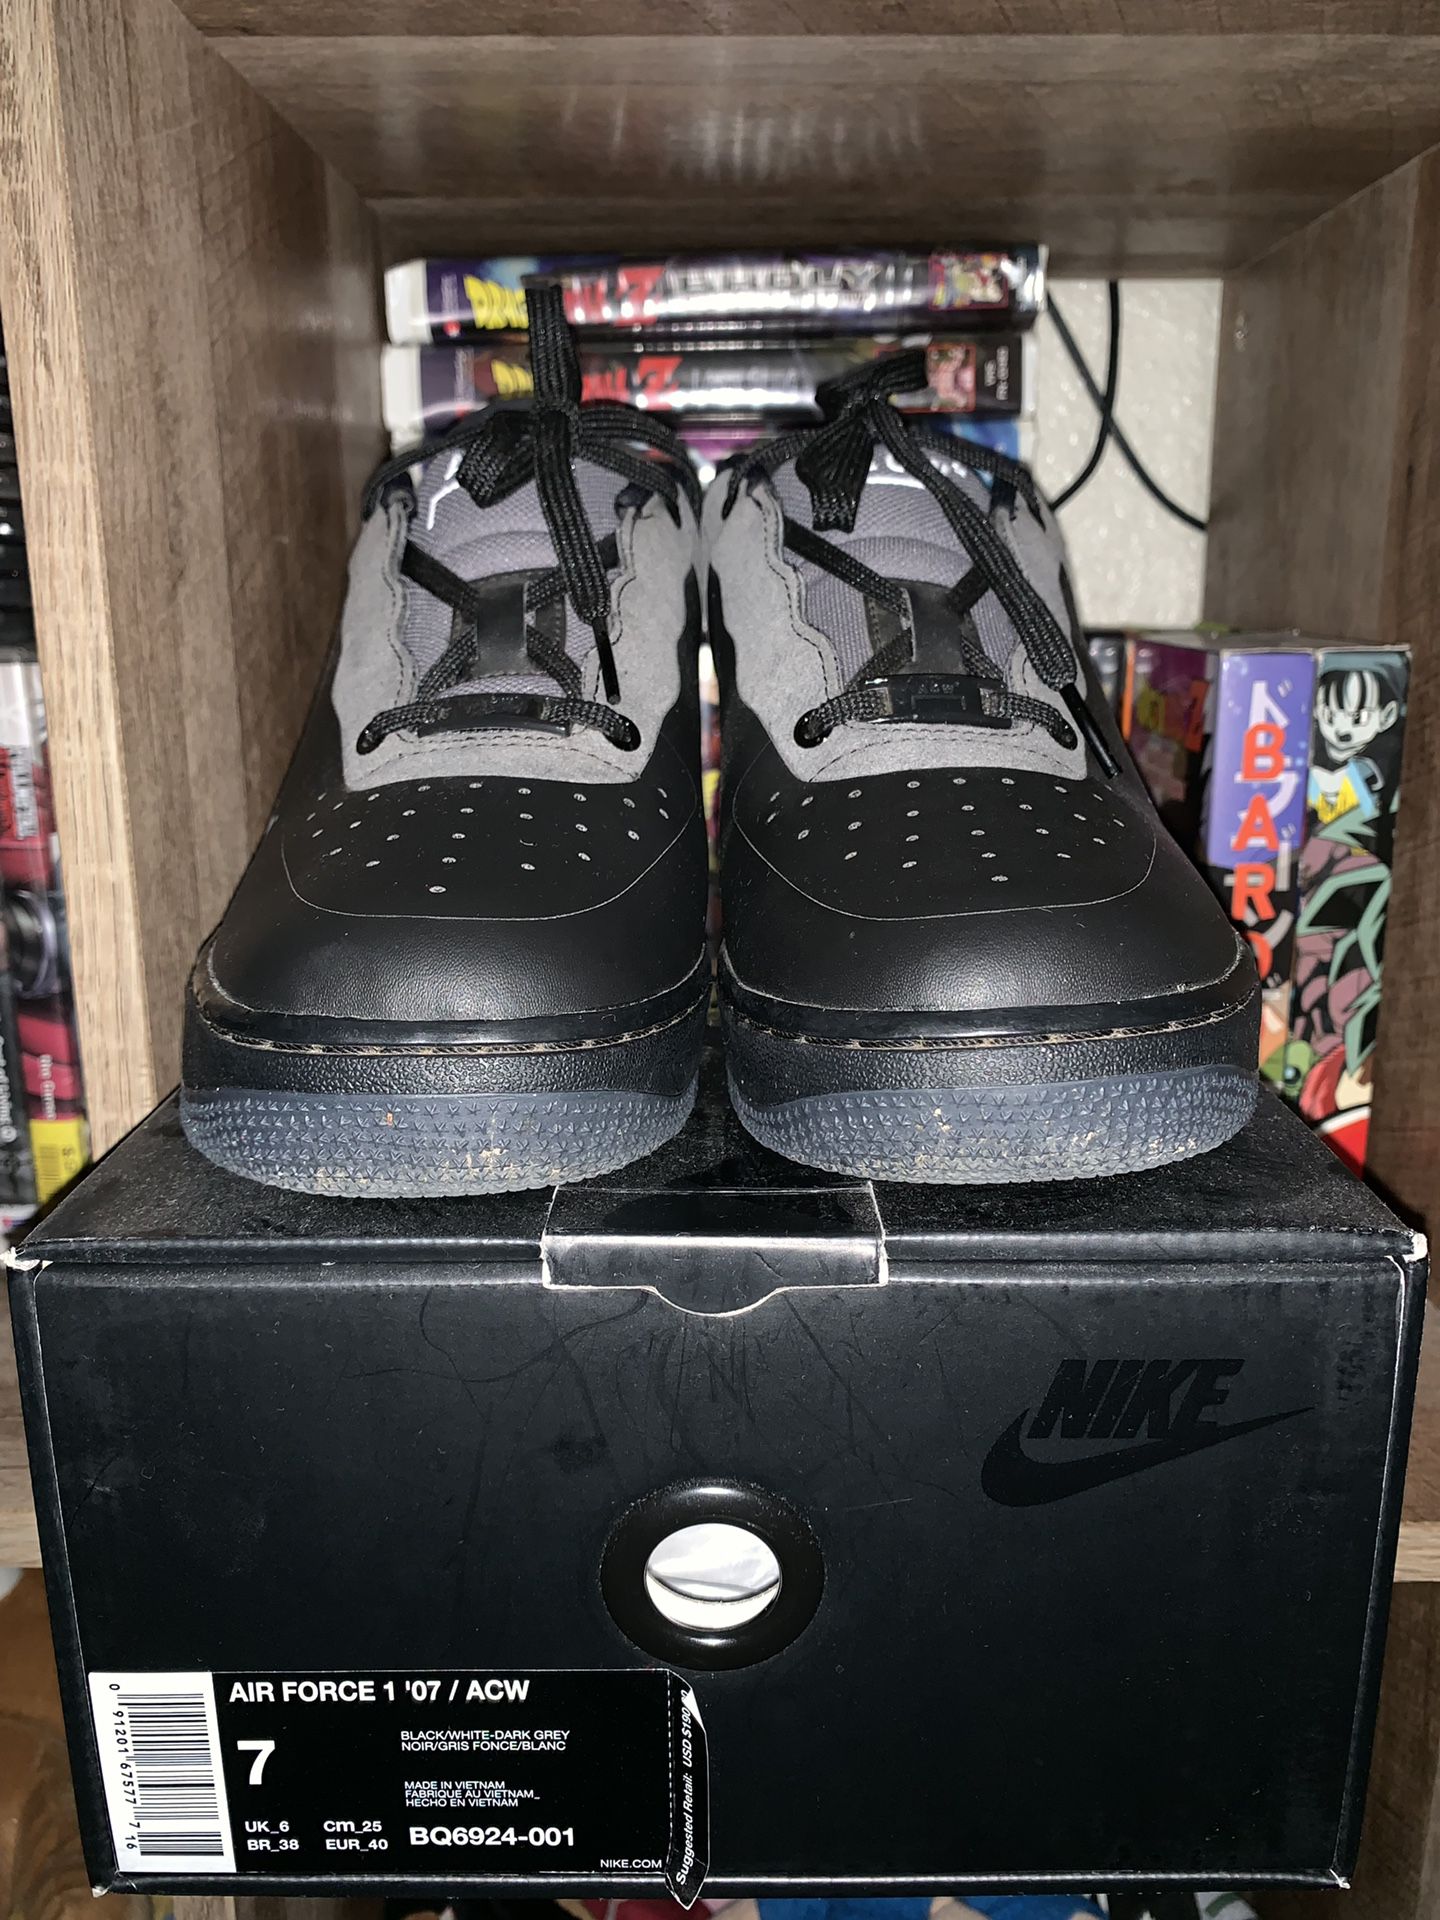 ACW Air Force 1s Size 7